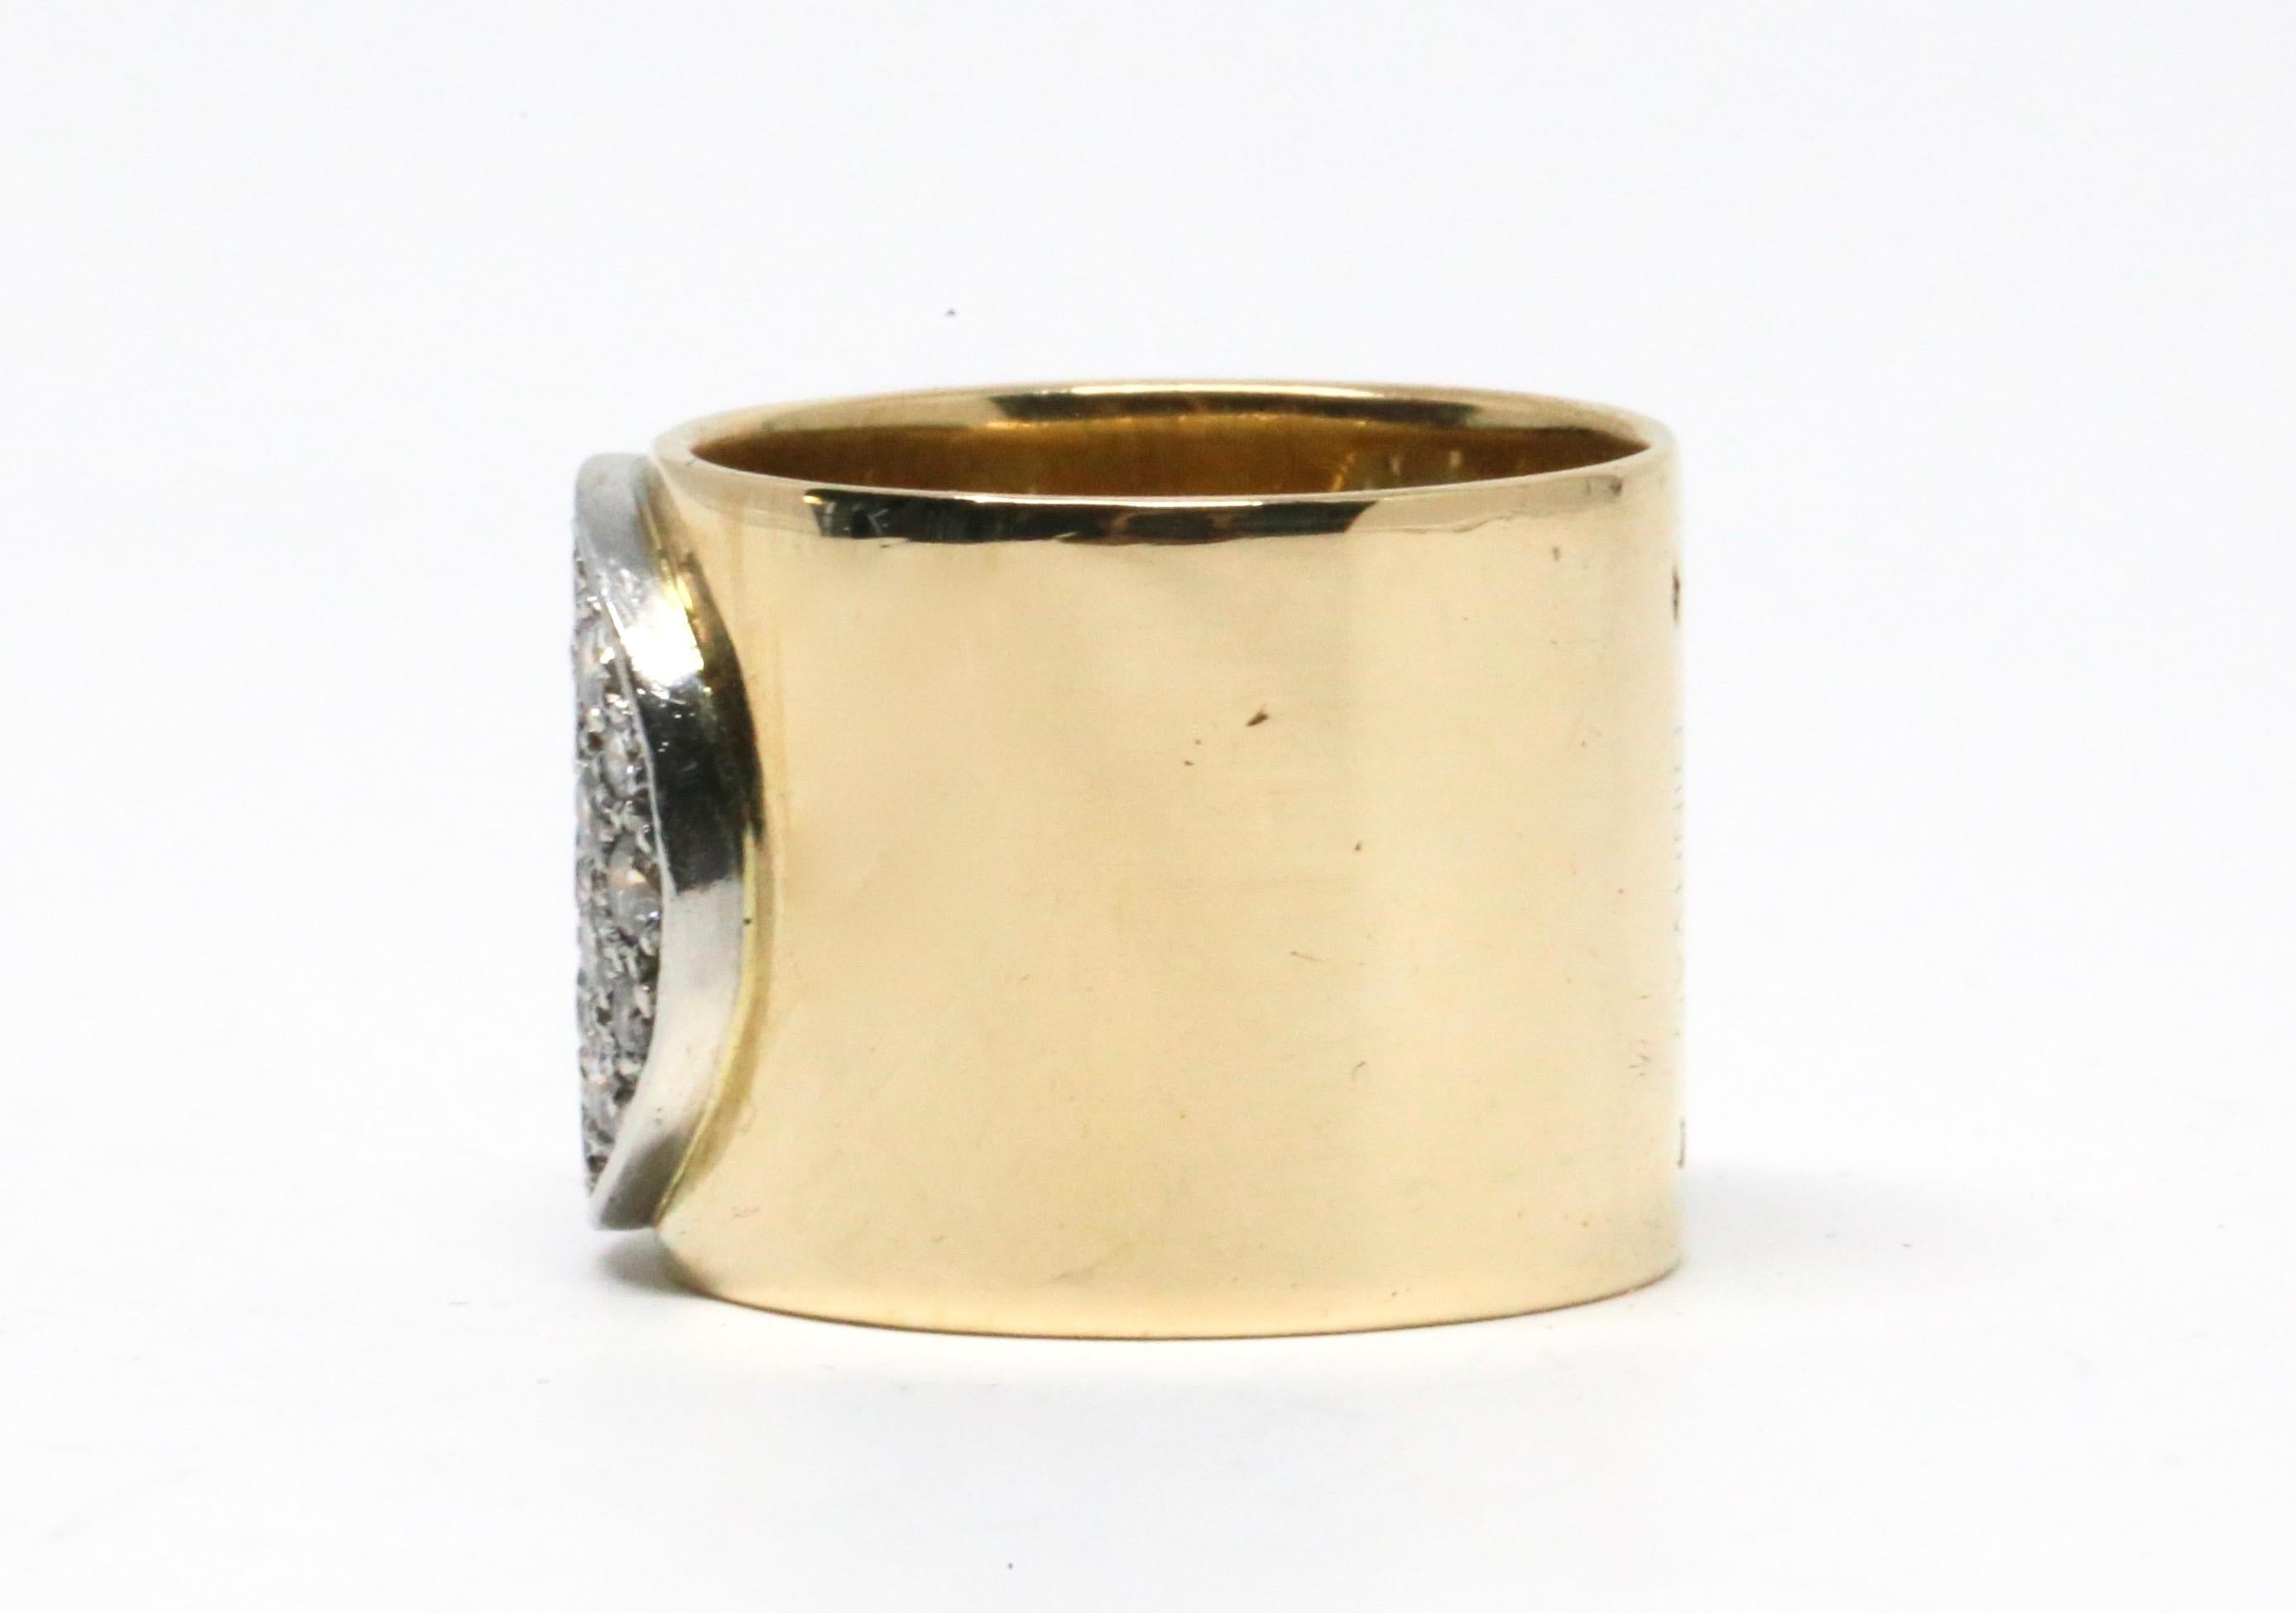 Early example of the' Anthéa' ring in 18k yellow gold with 30 diamonds designed by Jean Dinh Van dating to the 1980's. Center of ring falls at an American size 7 however due to the thickness of the band (16mm), this ring best fits a size 6 to 6.5